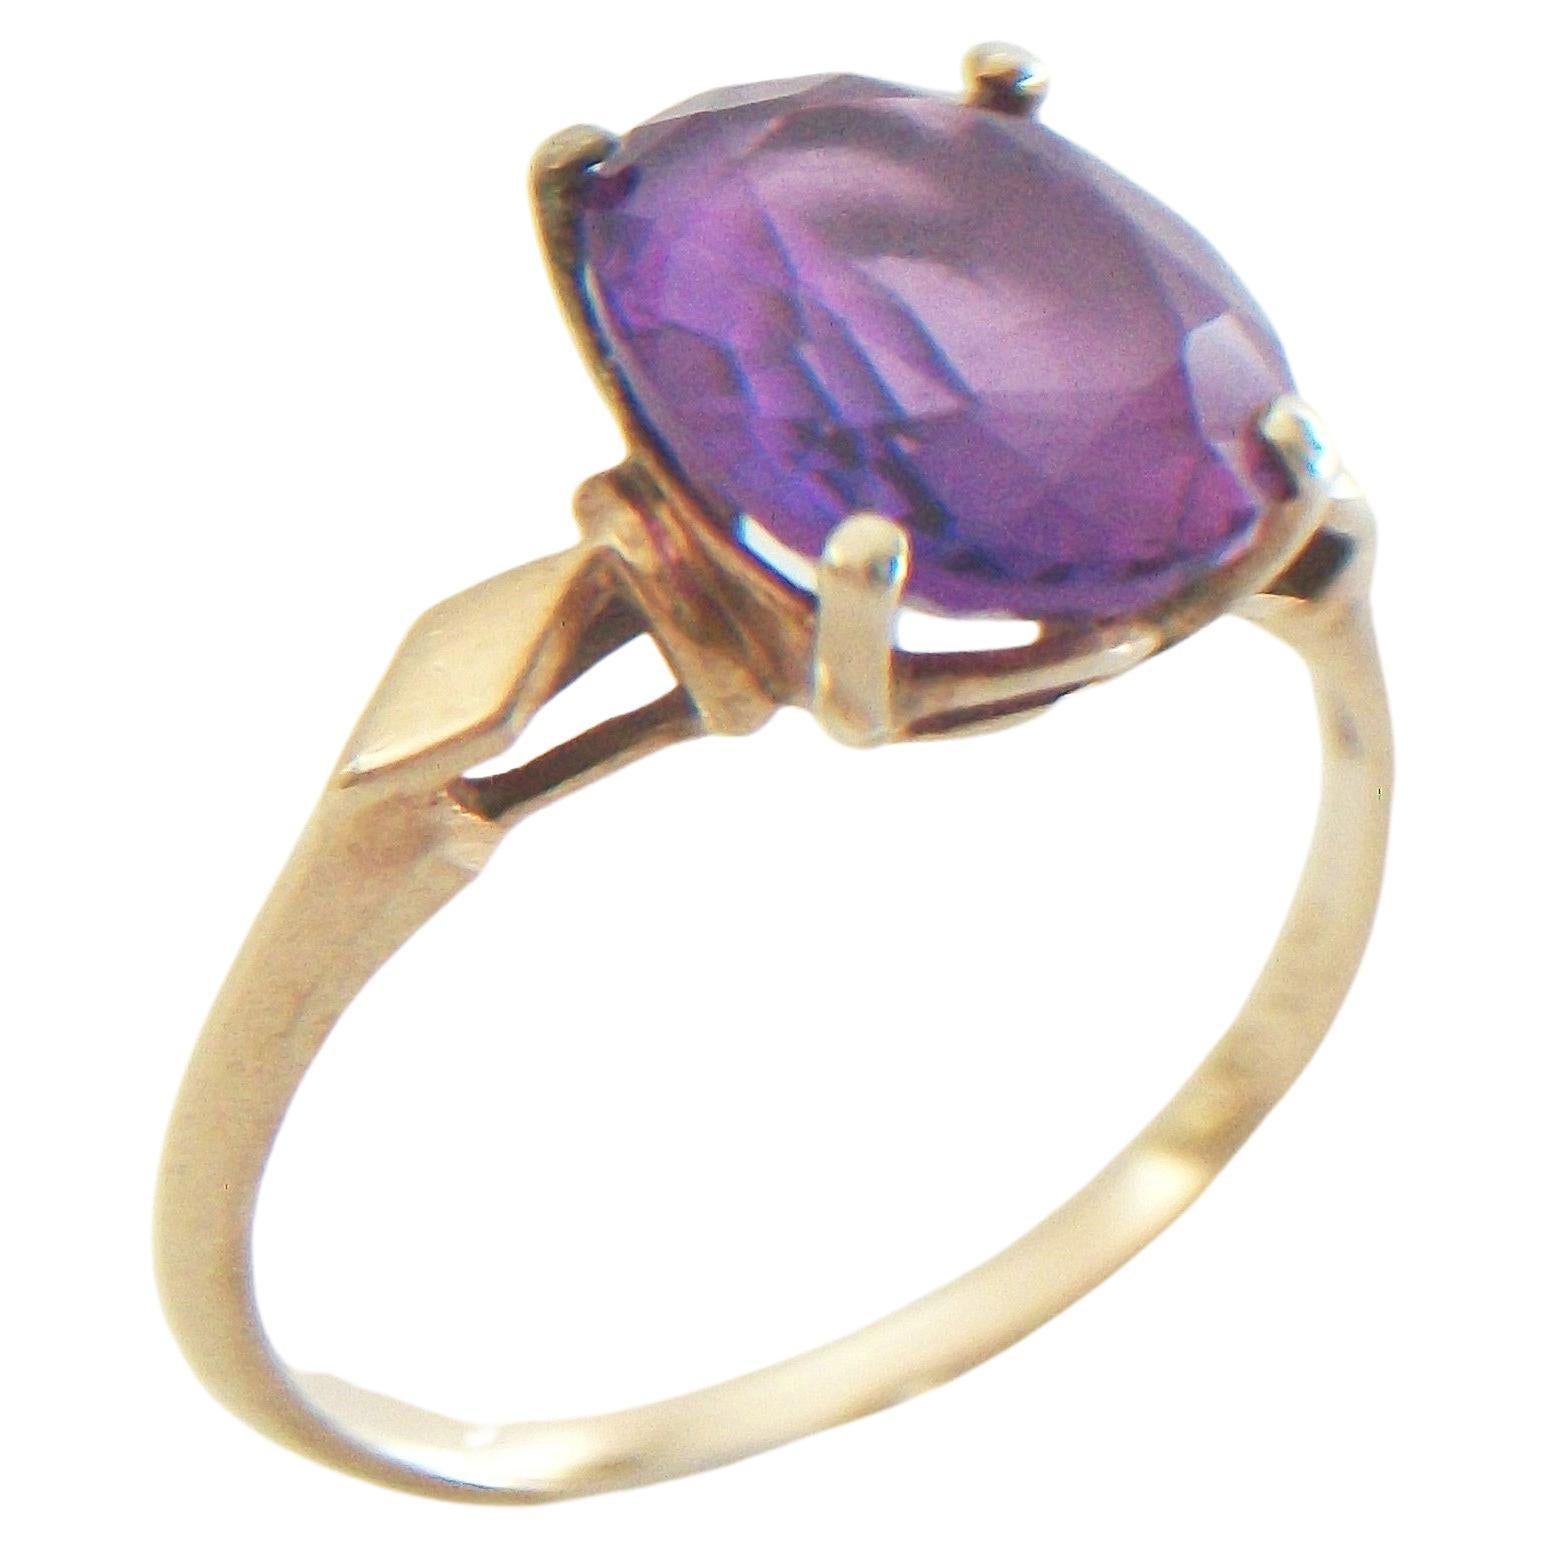 ARTHUR M. ANDERSON - Amethyst & 10K Gold Ring - United States - 20th Century For Sale